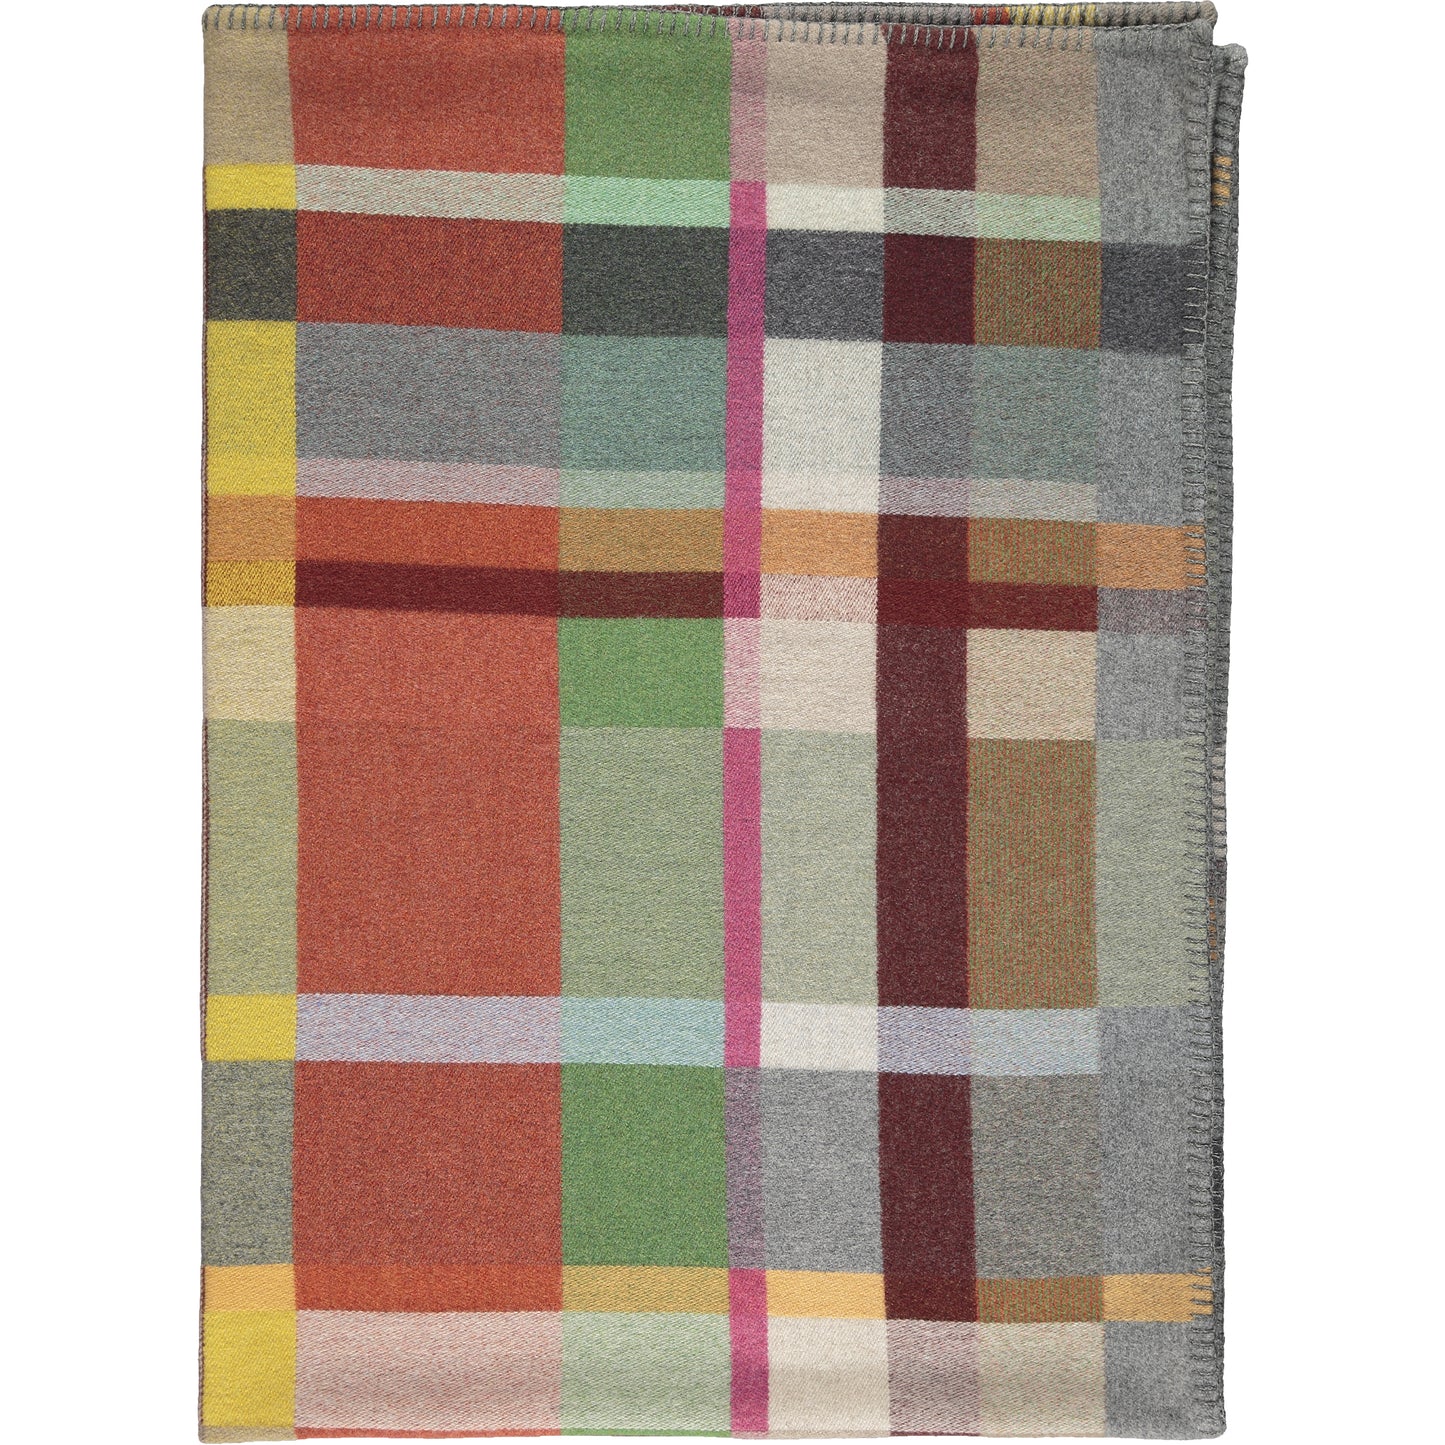 The Selvedge Blanket by Wallace & Sewell